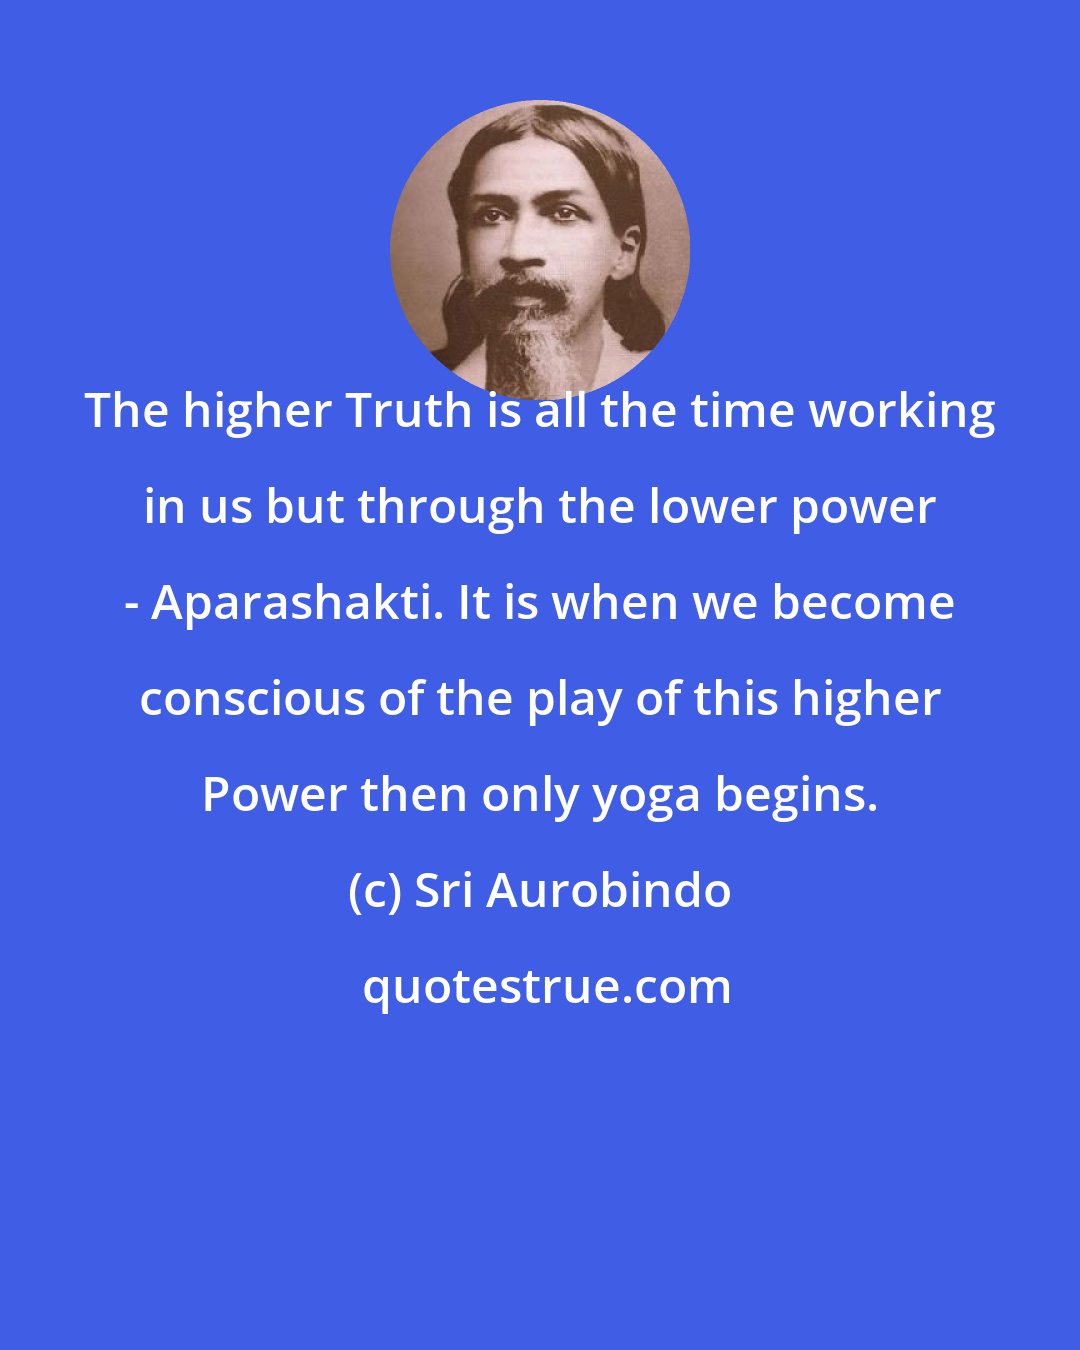 Sri Aurobindo: The higher Truth is all the time working in us but through the lower power - Aparashakti. It is when we become conscious of the play of this higher Power then only yoga begins.